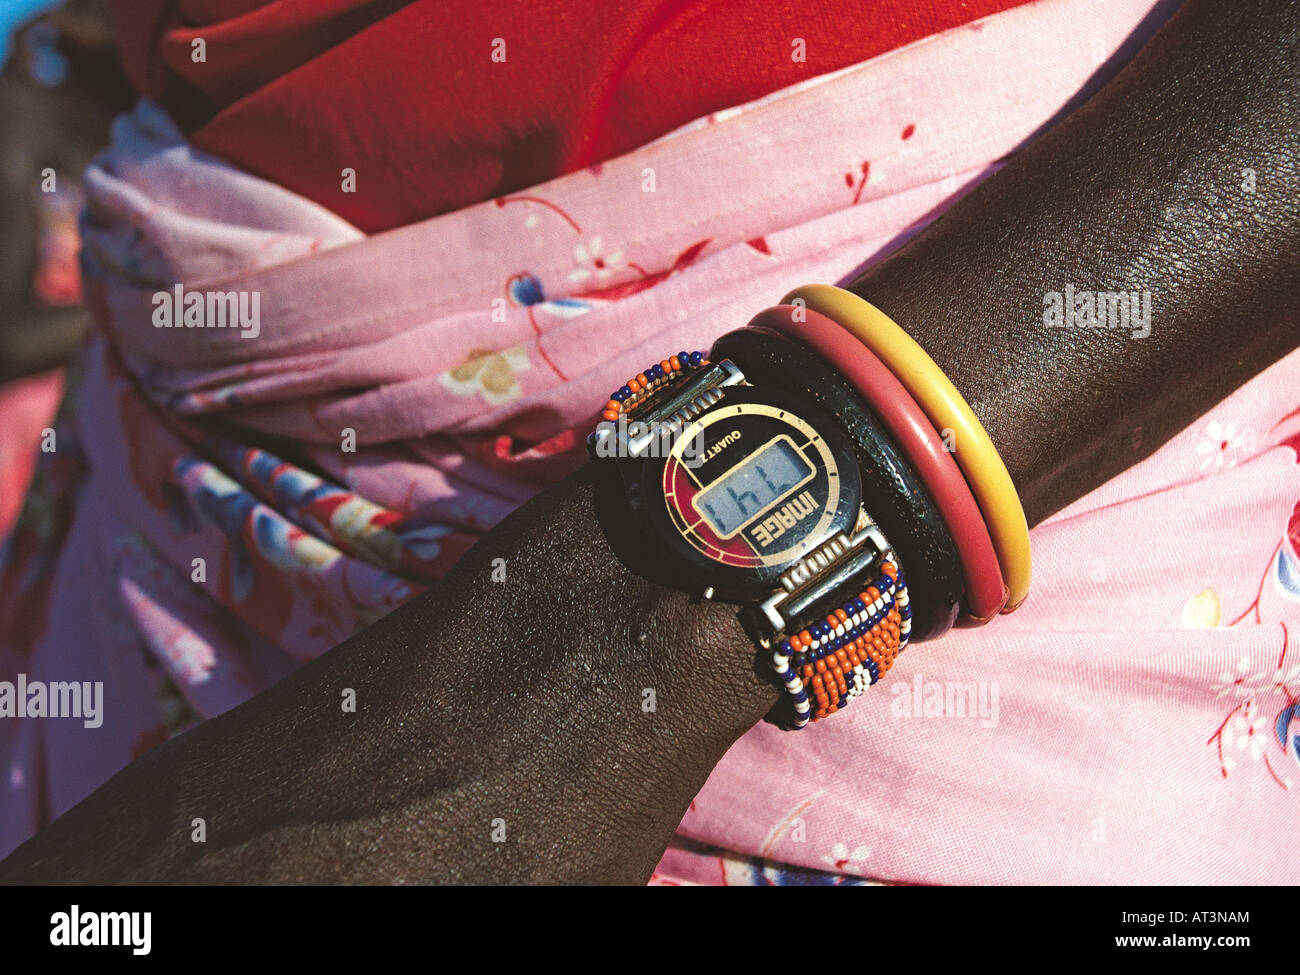 Close up of Samburu warrior s arm with two coloured plastic bracelets and a quartz digital watch on a traditional leather strap Stock Photo